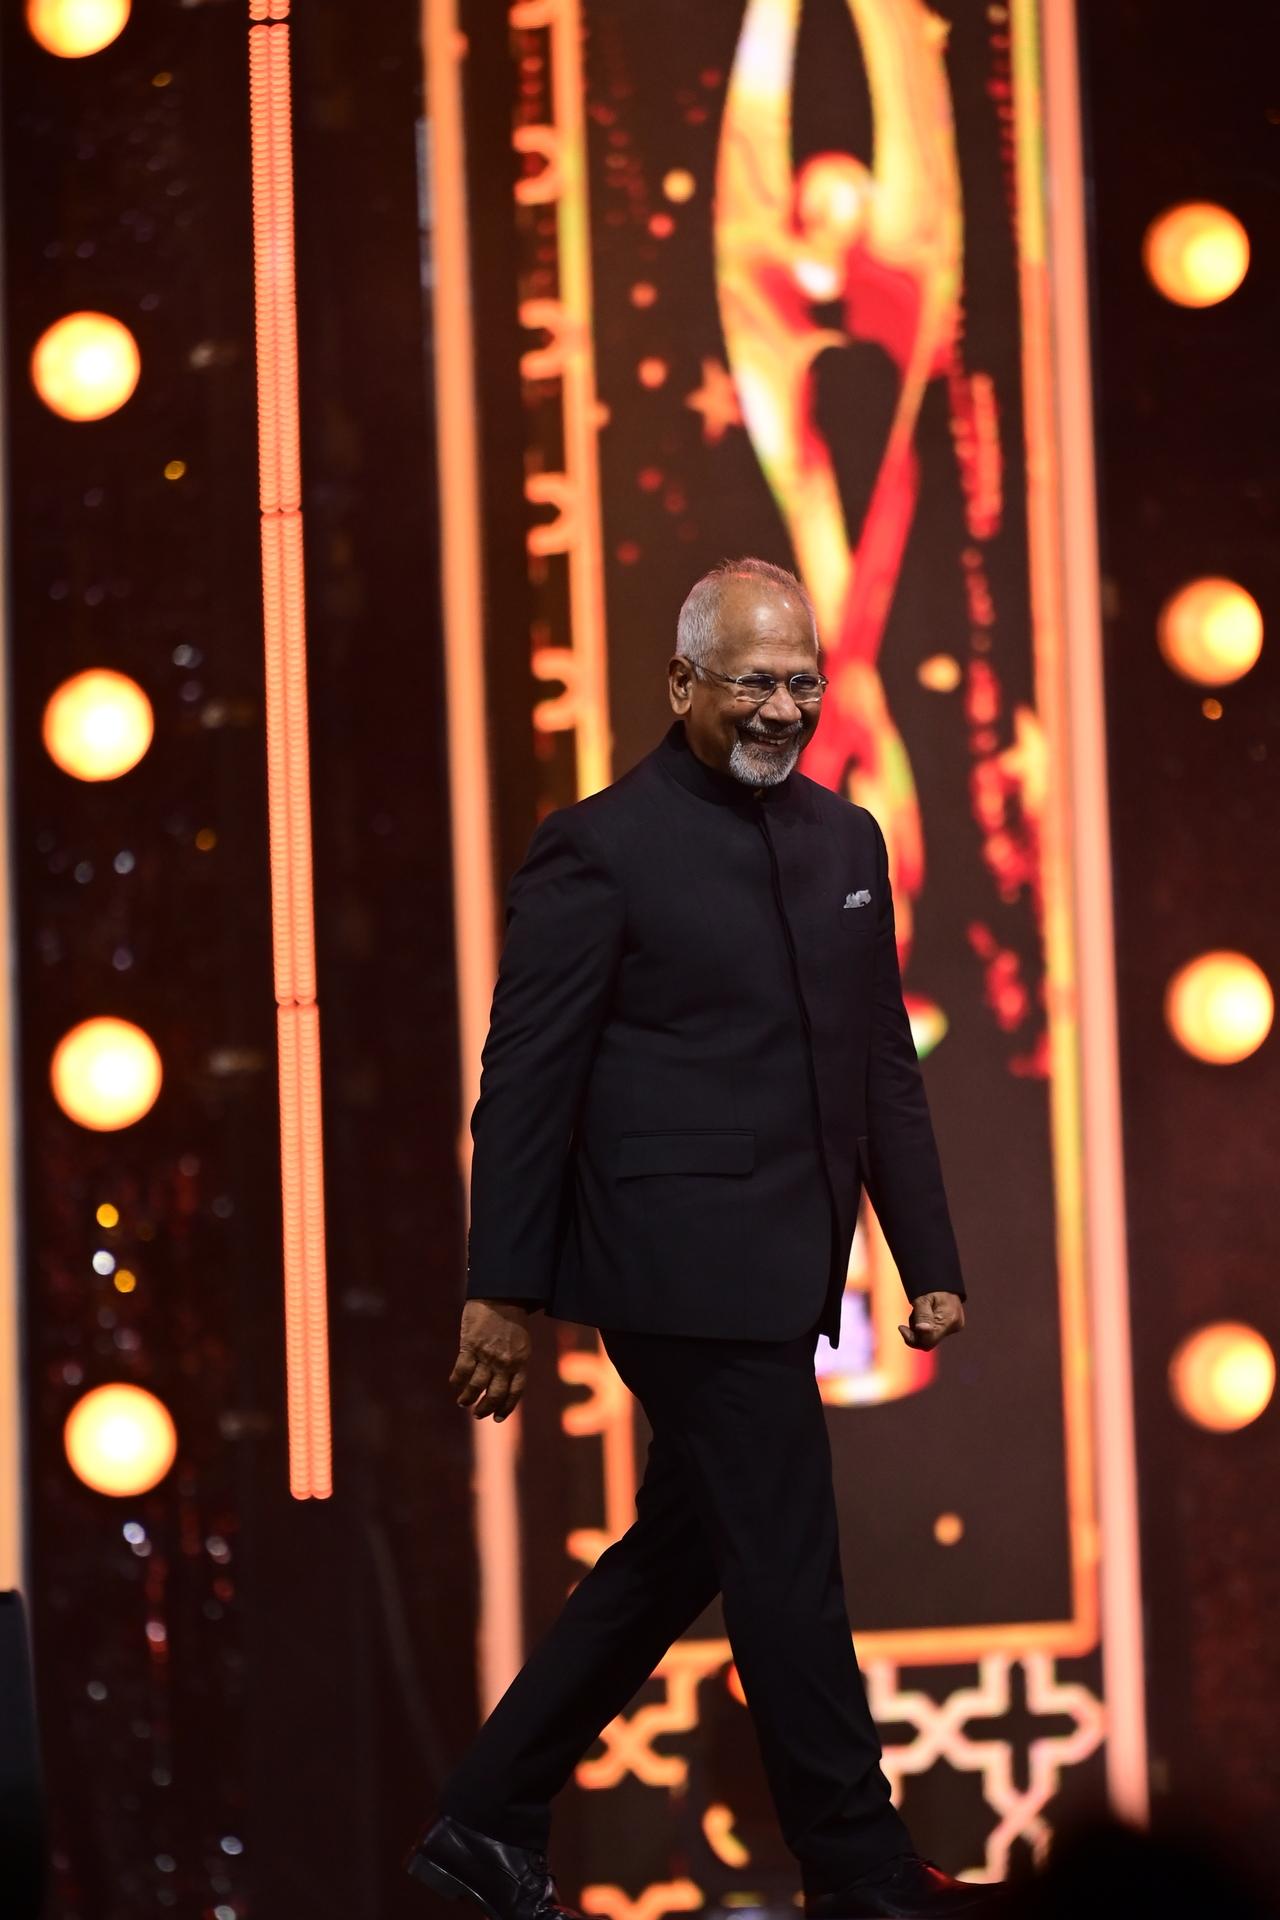 The iconic Mani Ratnam’s happiness gleams as he walks off stage, having left an indelible mark! The stalwart's latest work PS-1 won the Best Tamil Film award at SIIMA